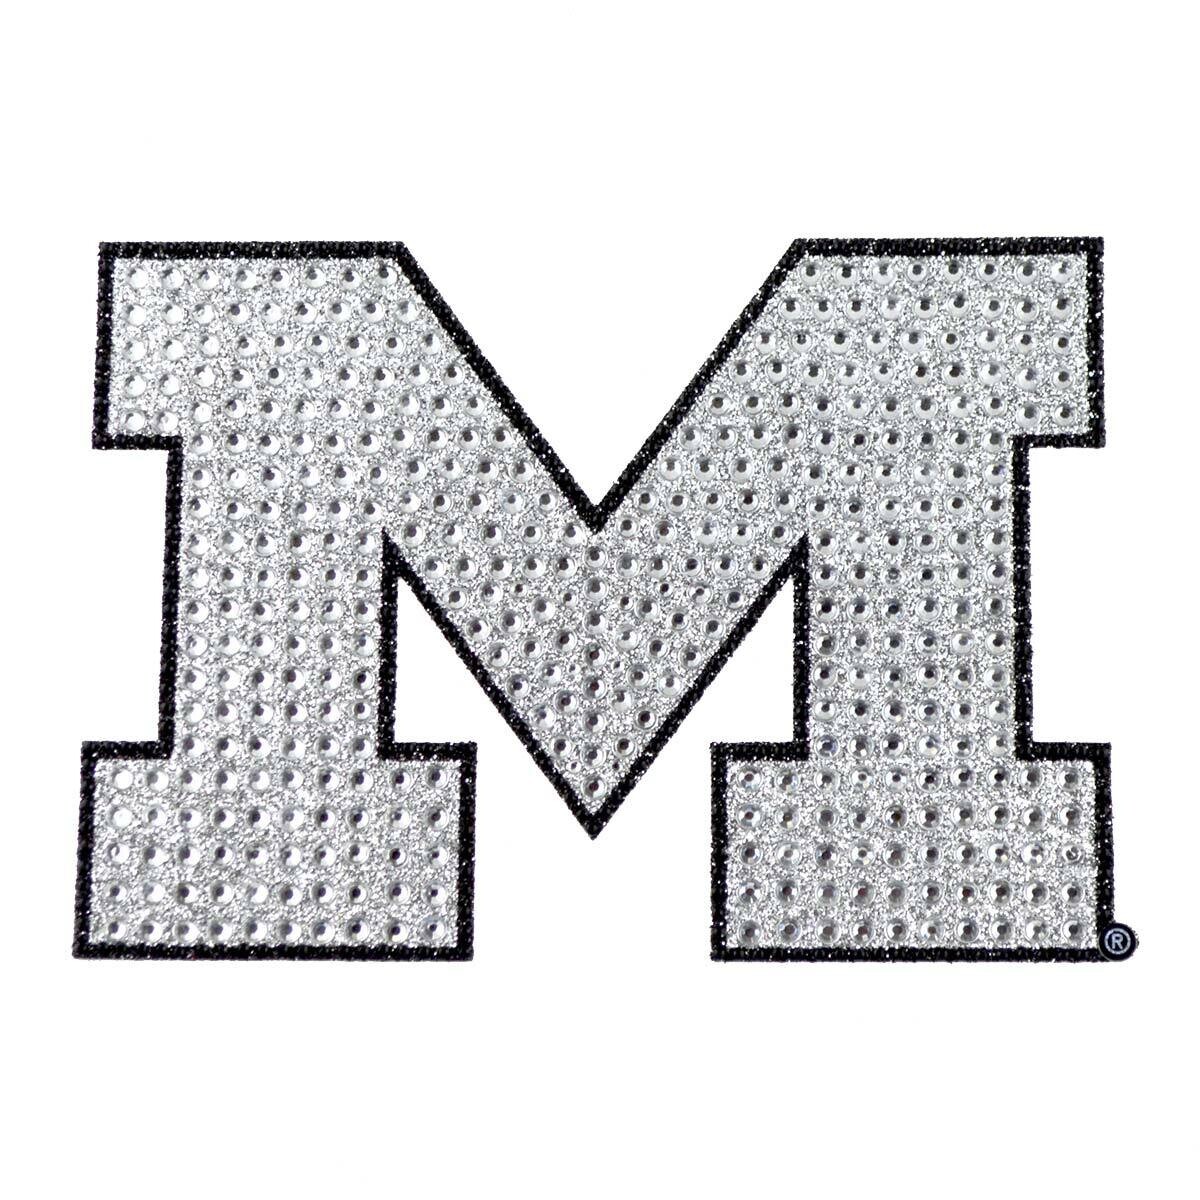 Bling Emblem Adhesive Decal with Silver Rhinestone - NCAA Michigan Wolverines